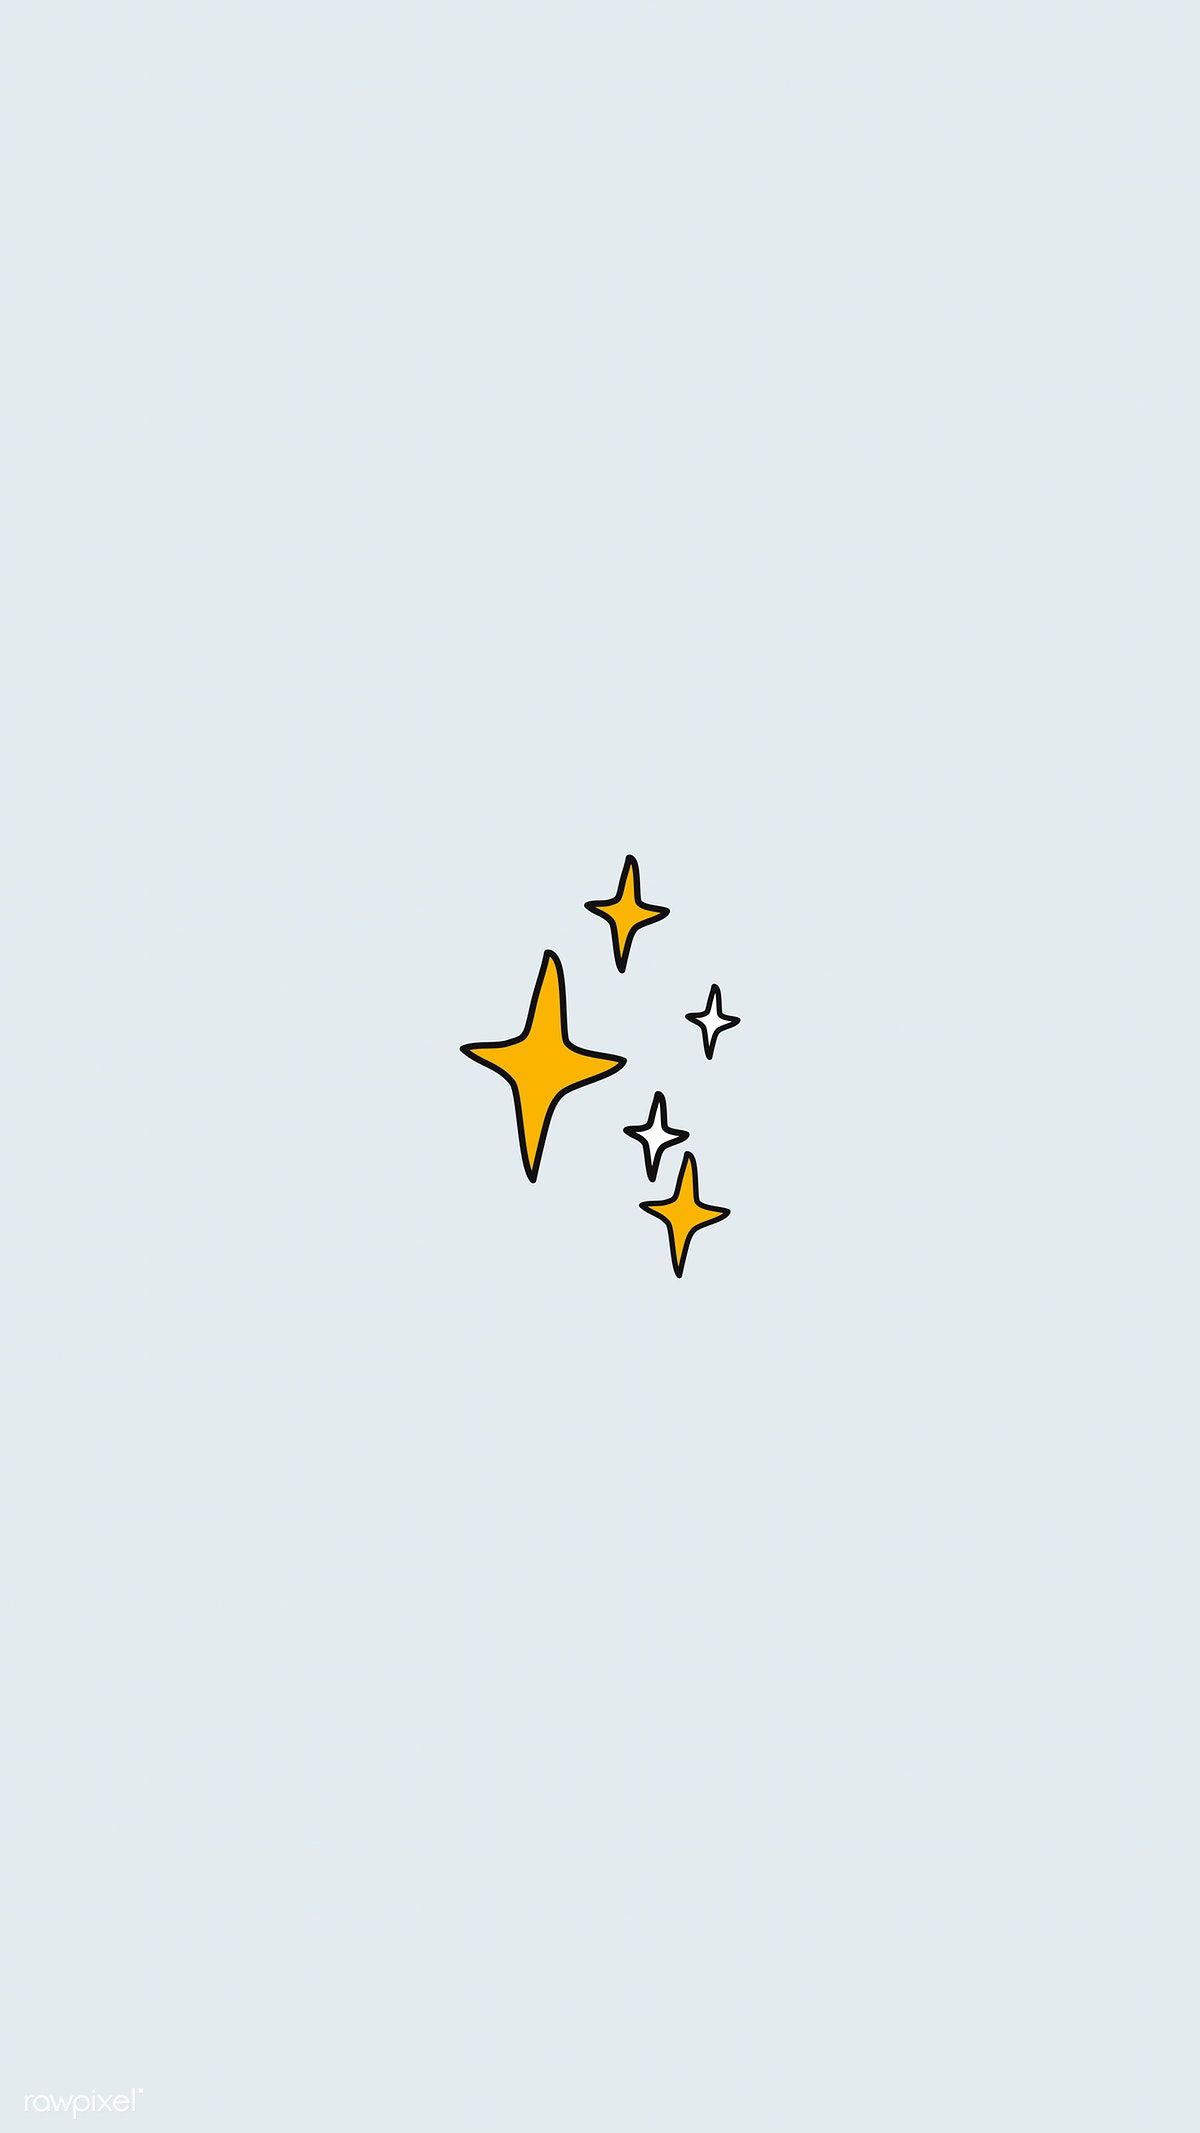 Hand drawn yellow star vector. free image / Adj. How to draw hands, Minimalist wallpaper, Cute wallpaper background